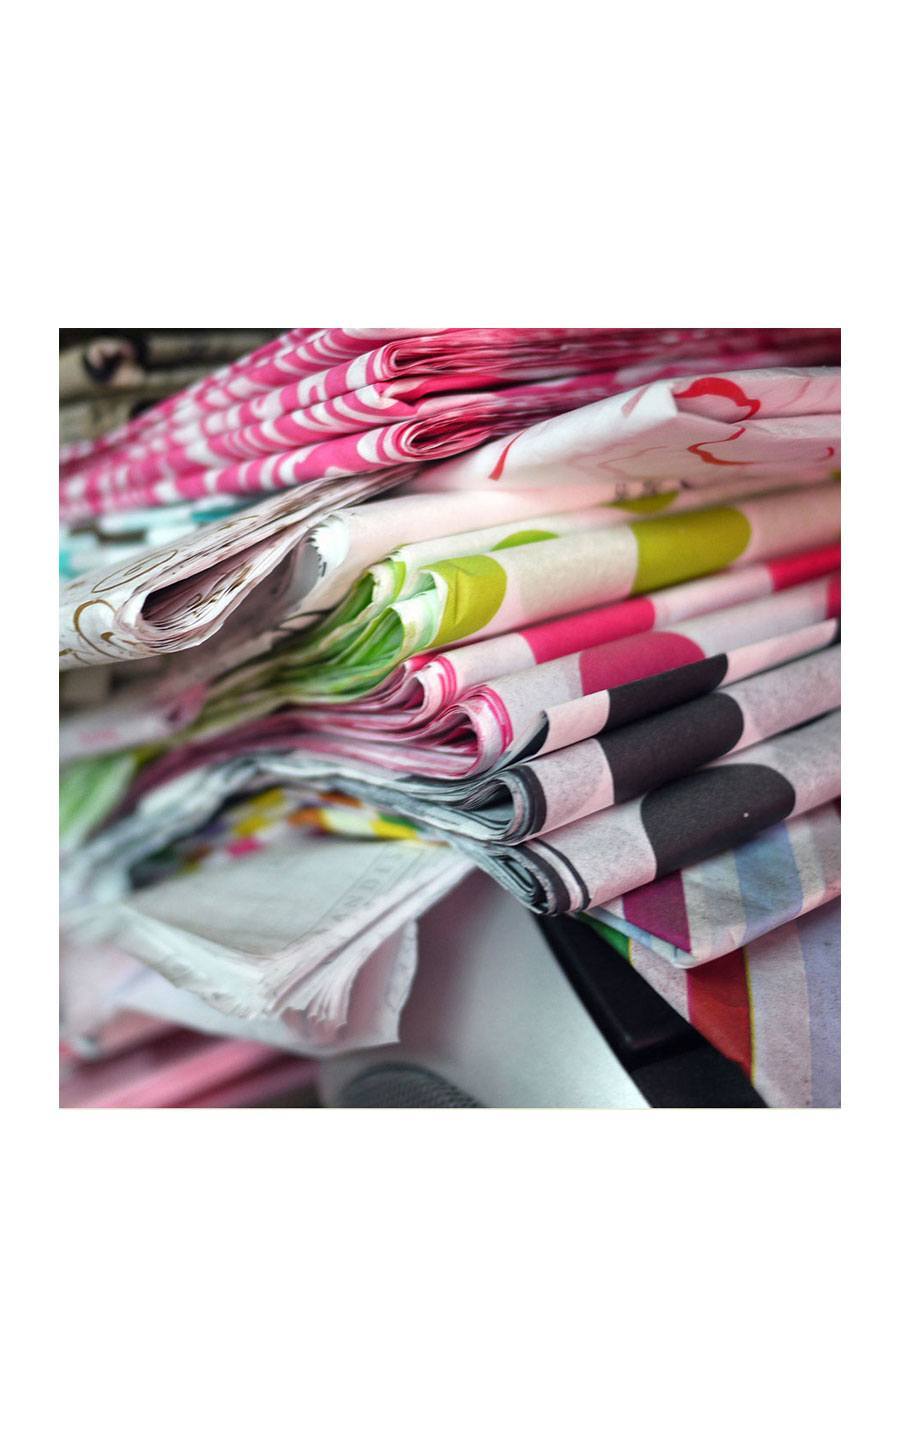 Custom Printed Tissue Paper for Your Company